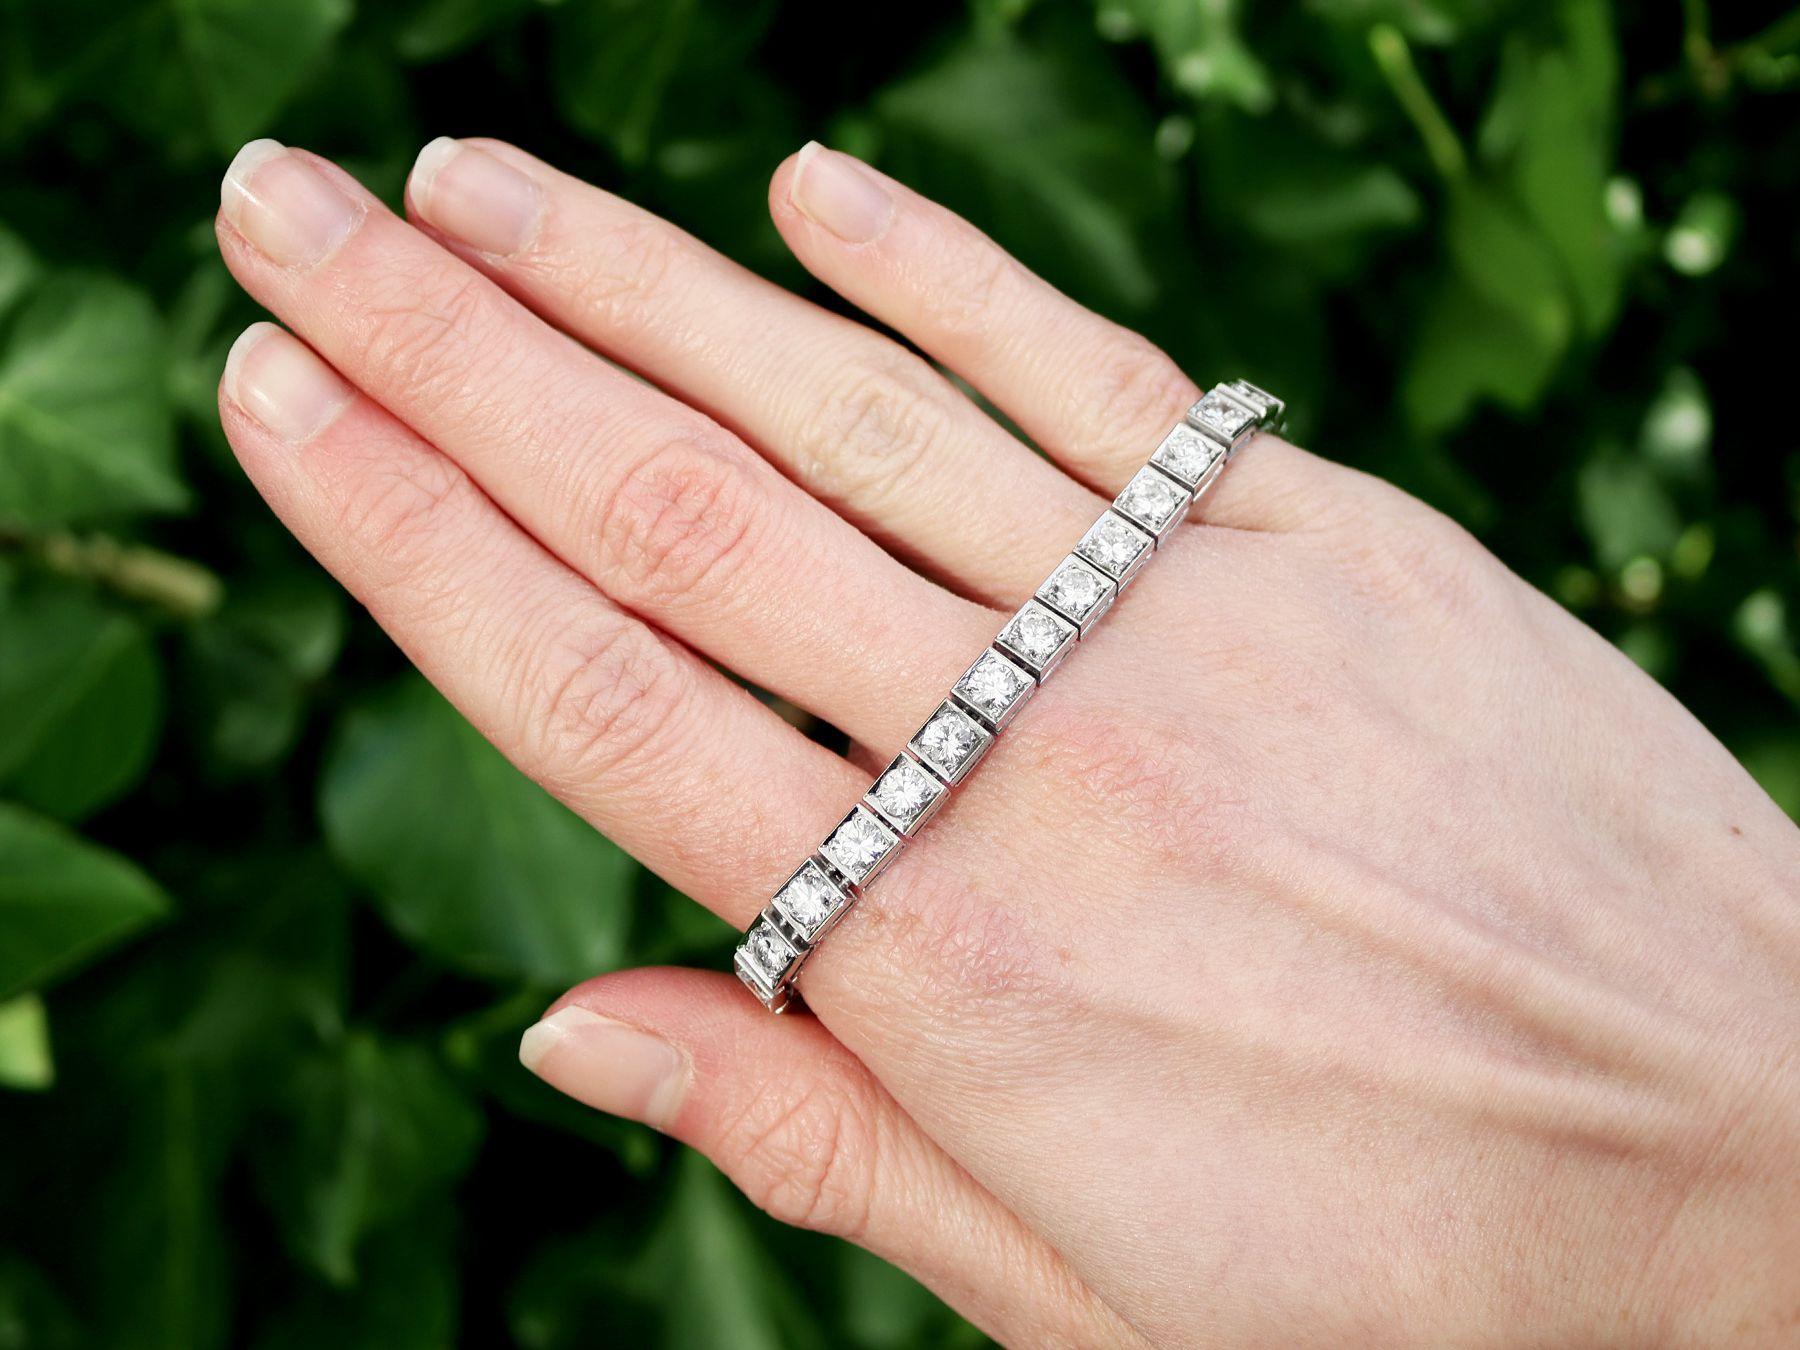 A stunning, fine and impressive antique 7.80 carat diamond and 18 karat white gold bracelet; part of our diverse diamond jewelry and estate jewelry collections.

This stunning, fine and impressive antique diamond bracelet has been crafted in 18k